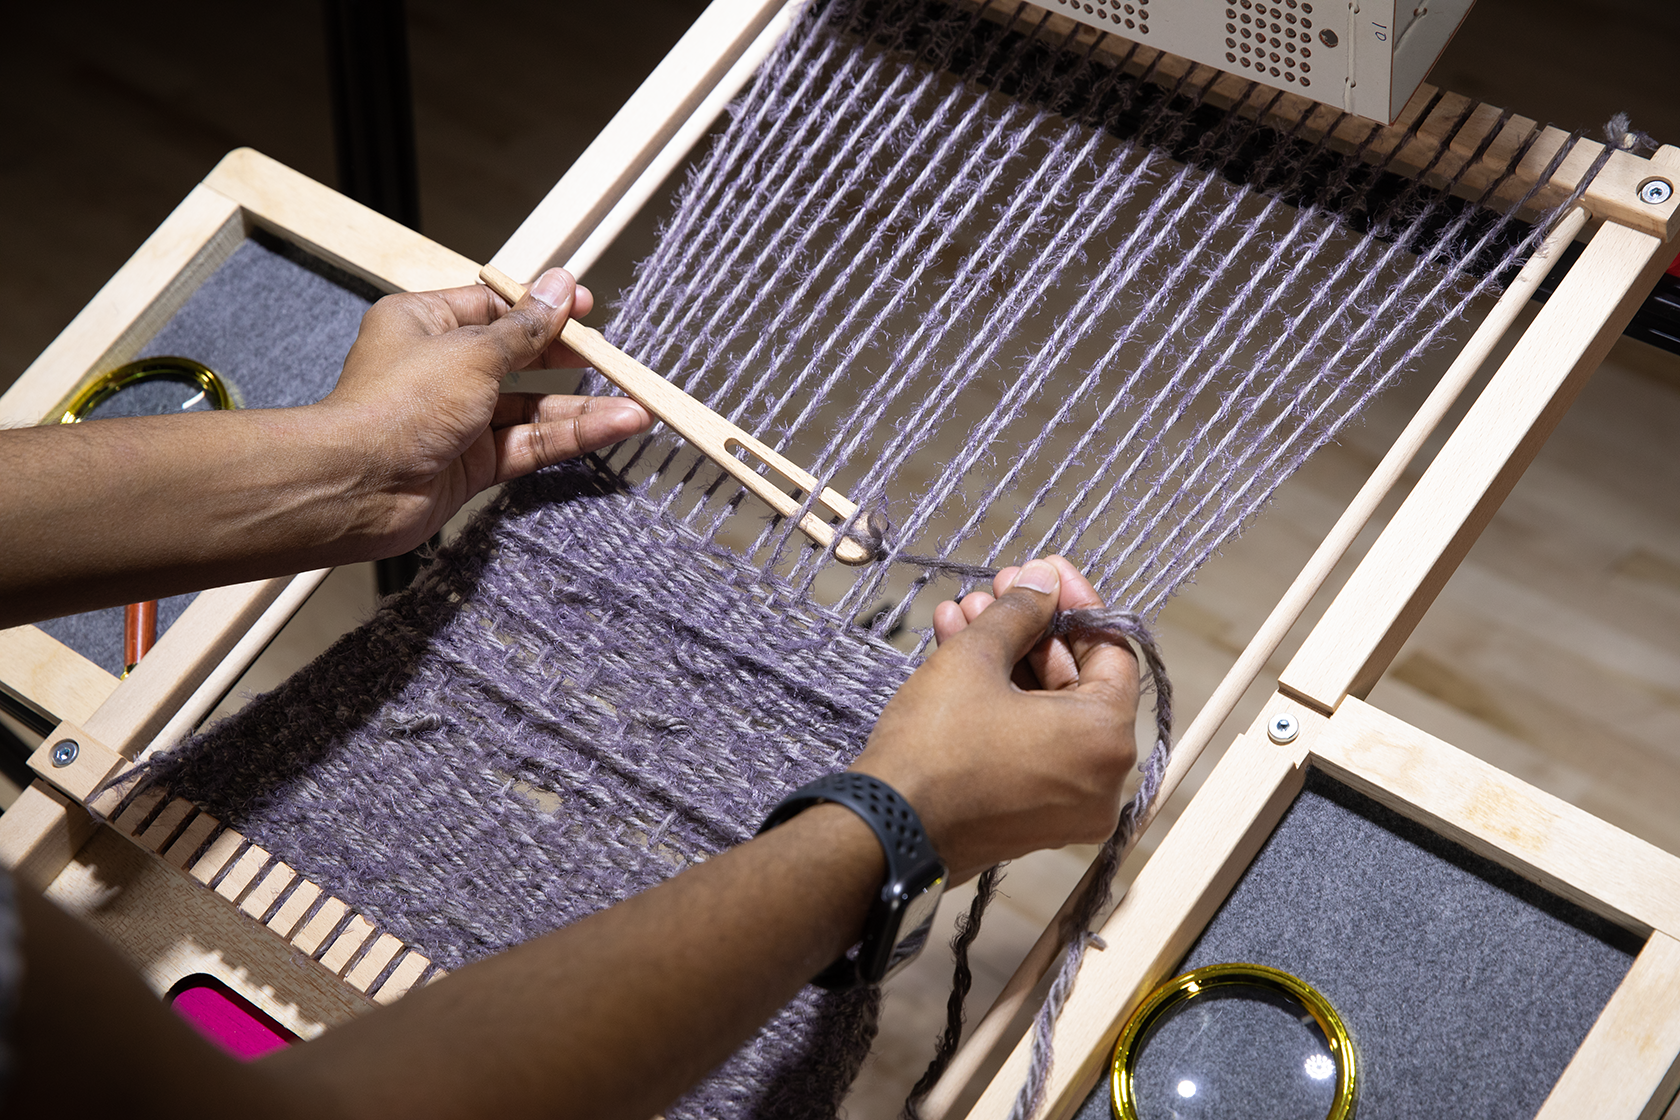 Close-up of the loom with the participant's hands weaving holding the shuttle while weaving